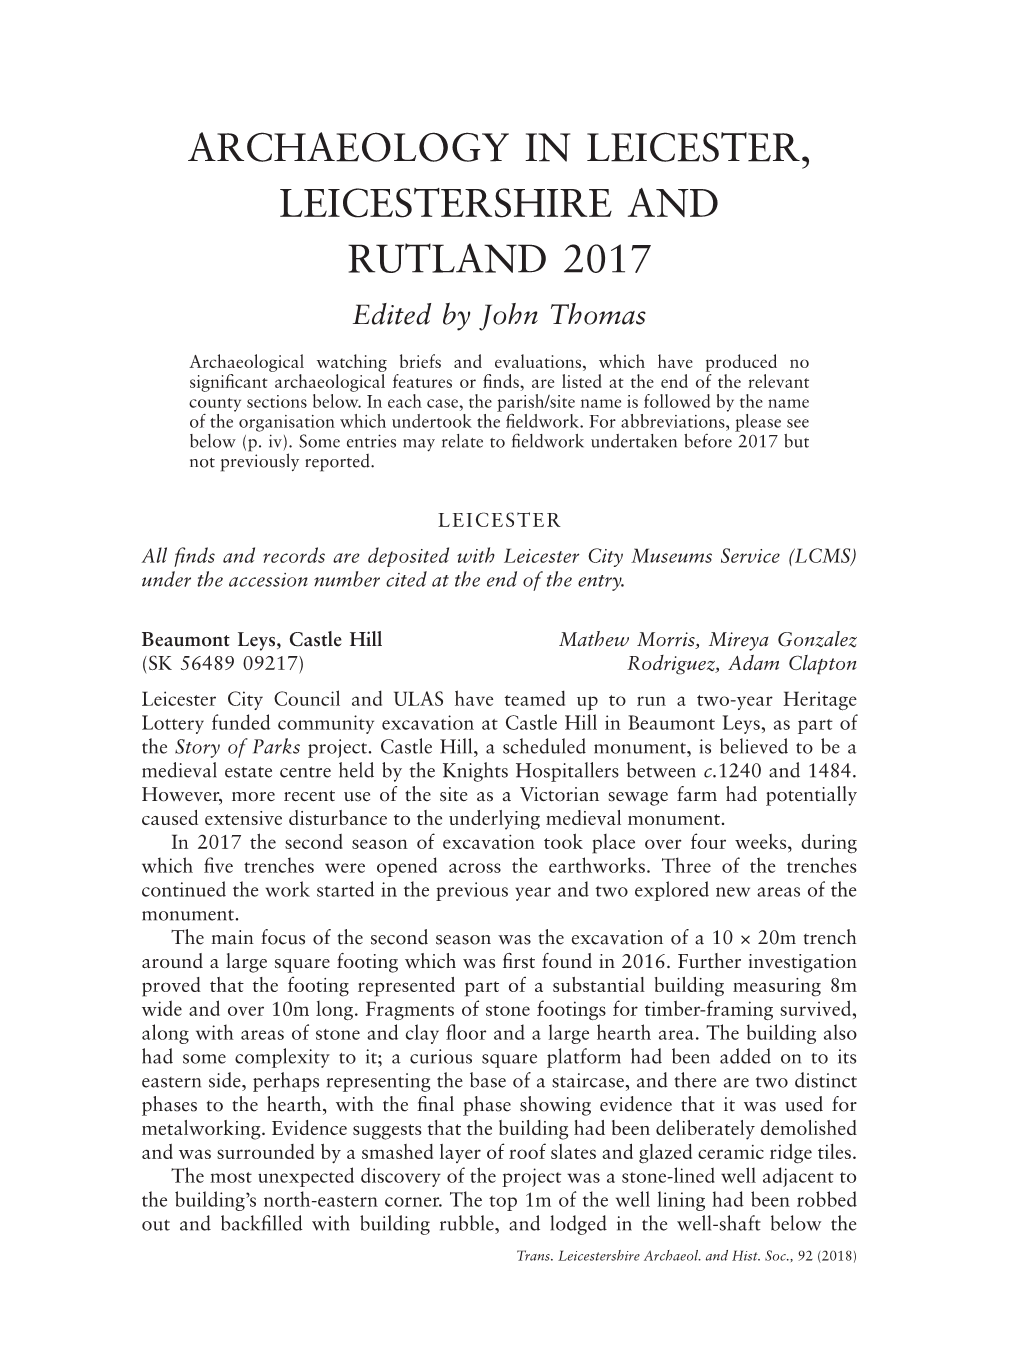 ARCHAEOLOGY in LEICESTER, LEICESTERSHIRE and RUTLAND 2017 Edited by John Thomas